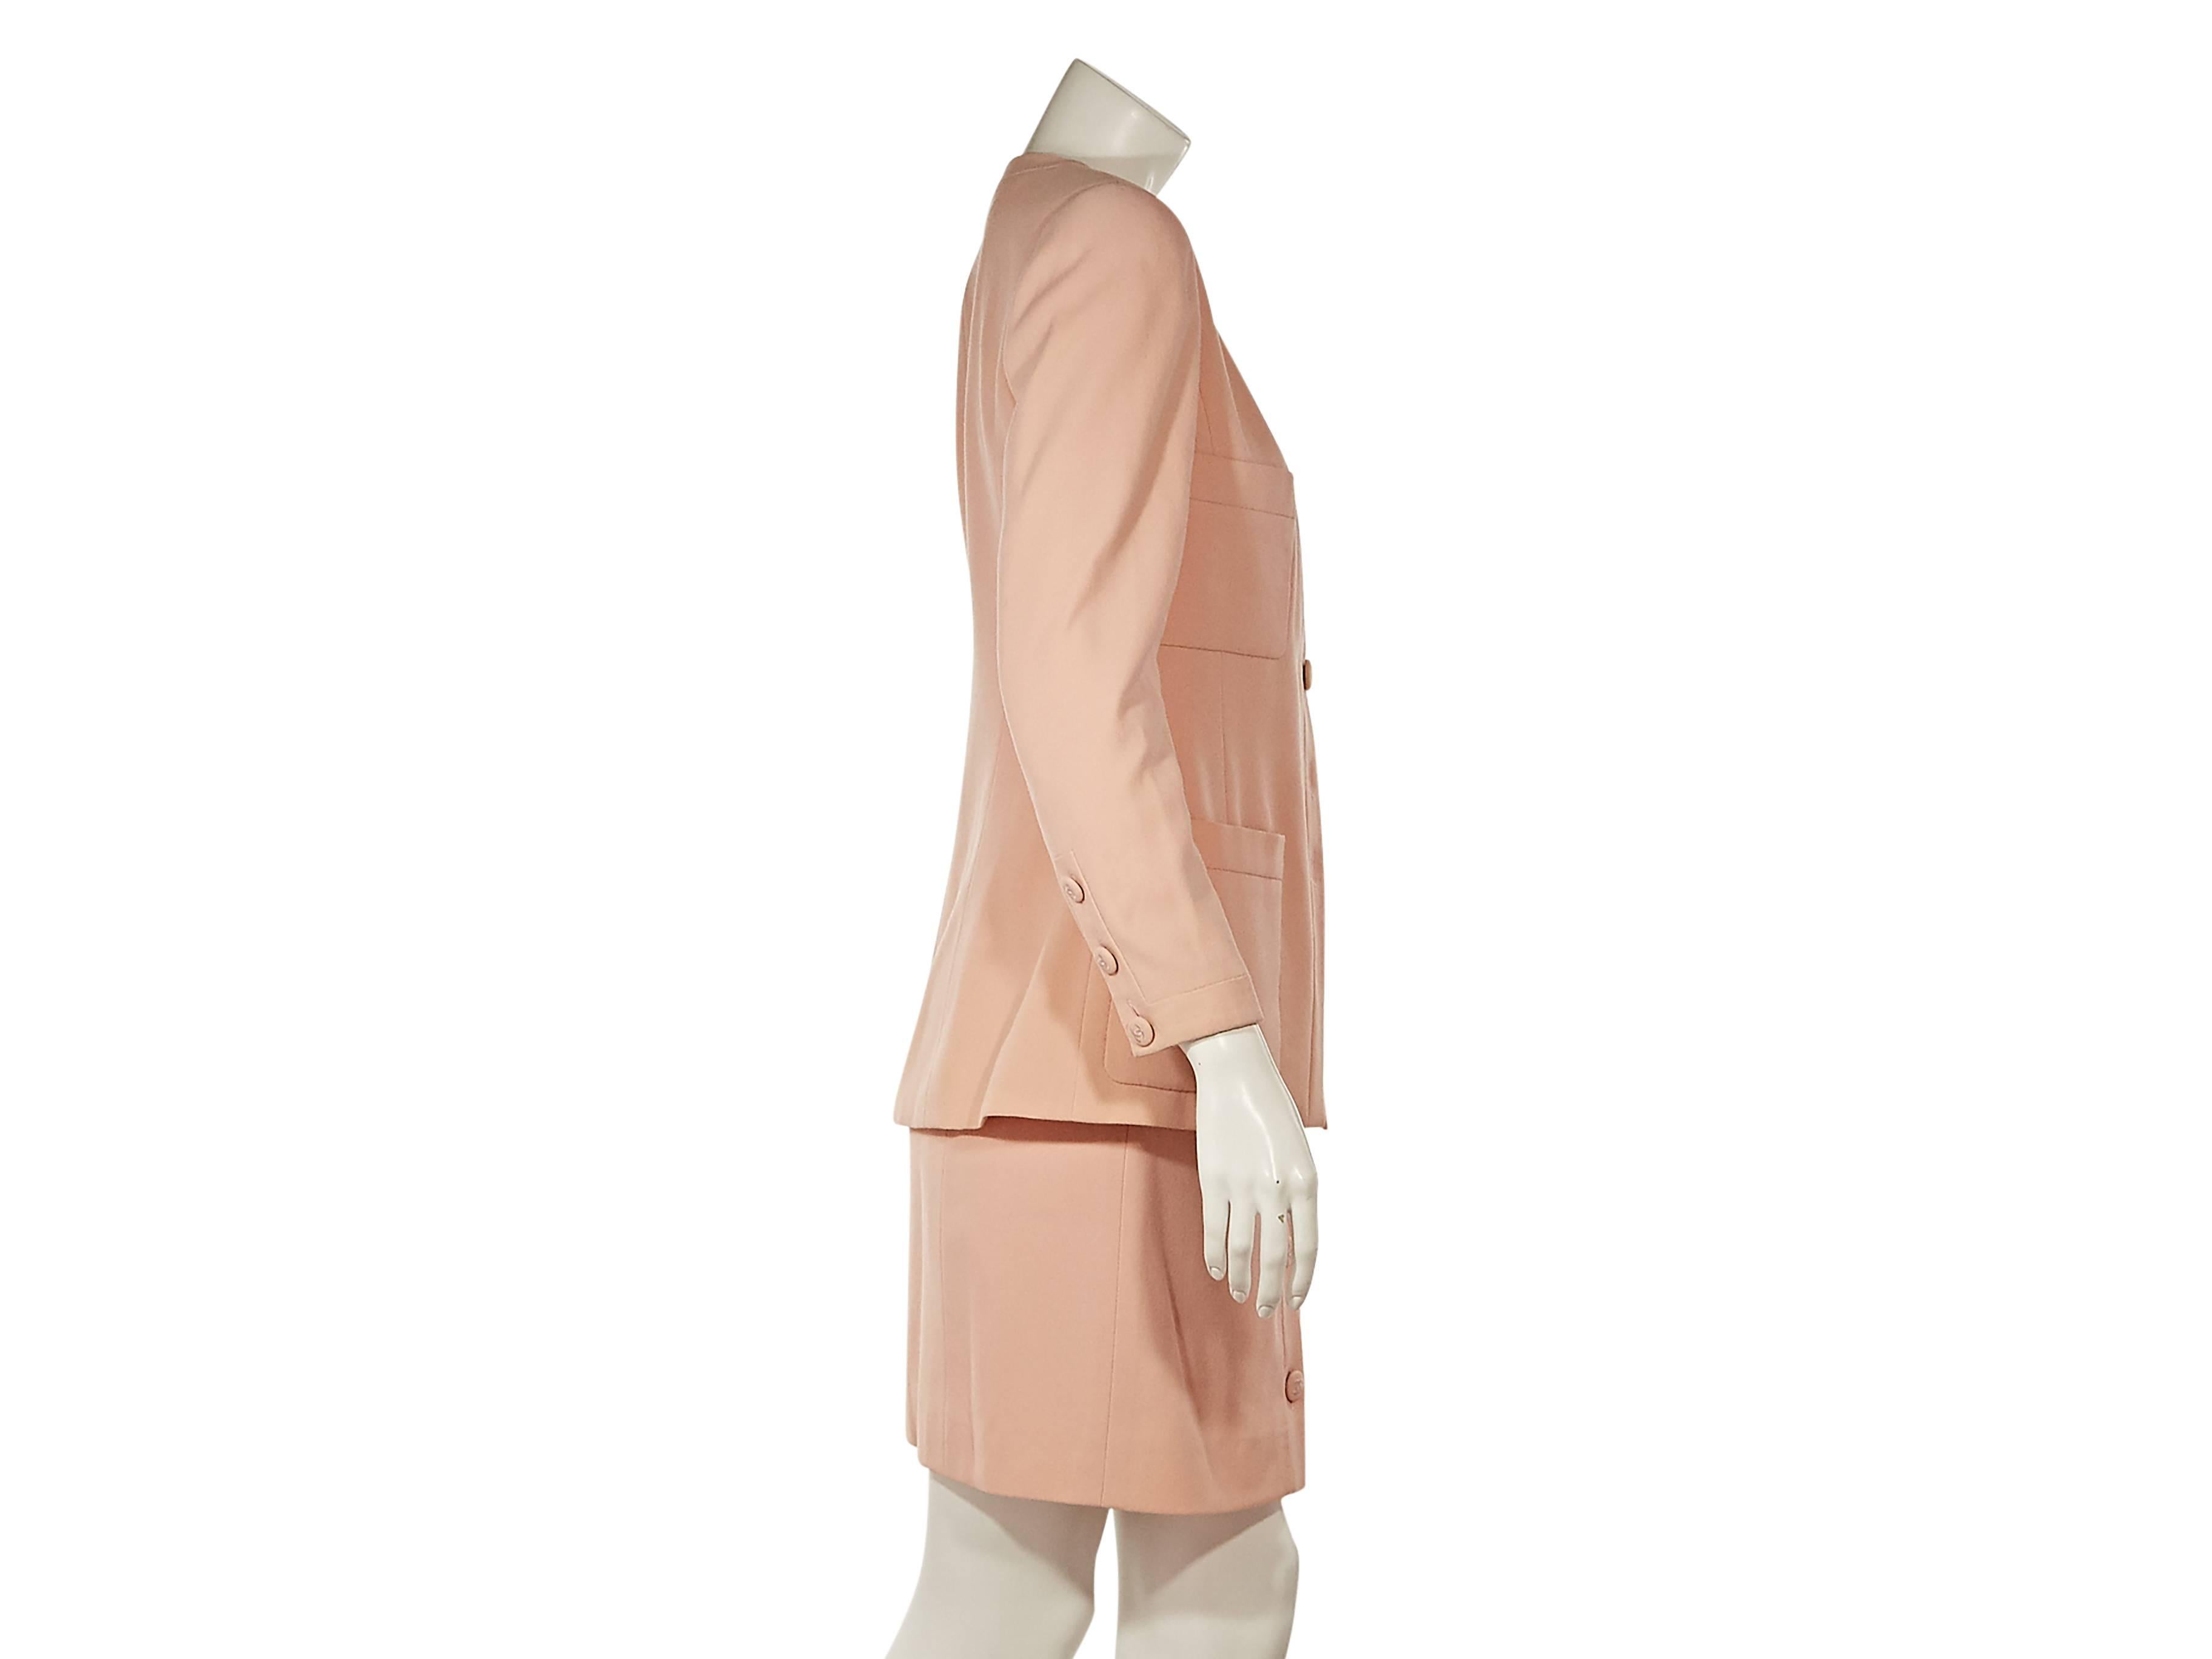 Product details:  Light pink wool skirt suit set by Chanel.  Lapel-less blazer.  Long sleeves with three-button cuffs.  Button-front closure.  Four patch pockets.  Matching skirt with banded waist.  Button-front closure.  
Condition: Excellent.  